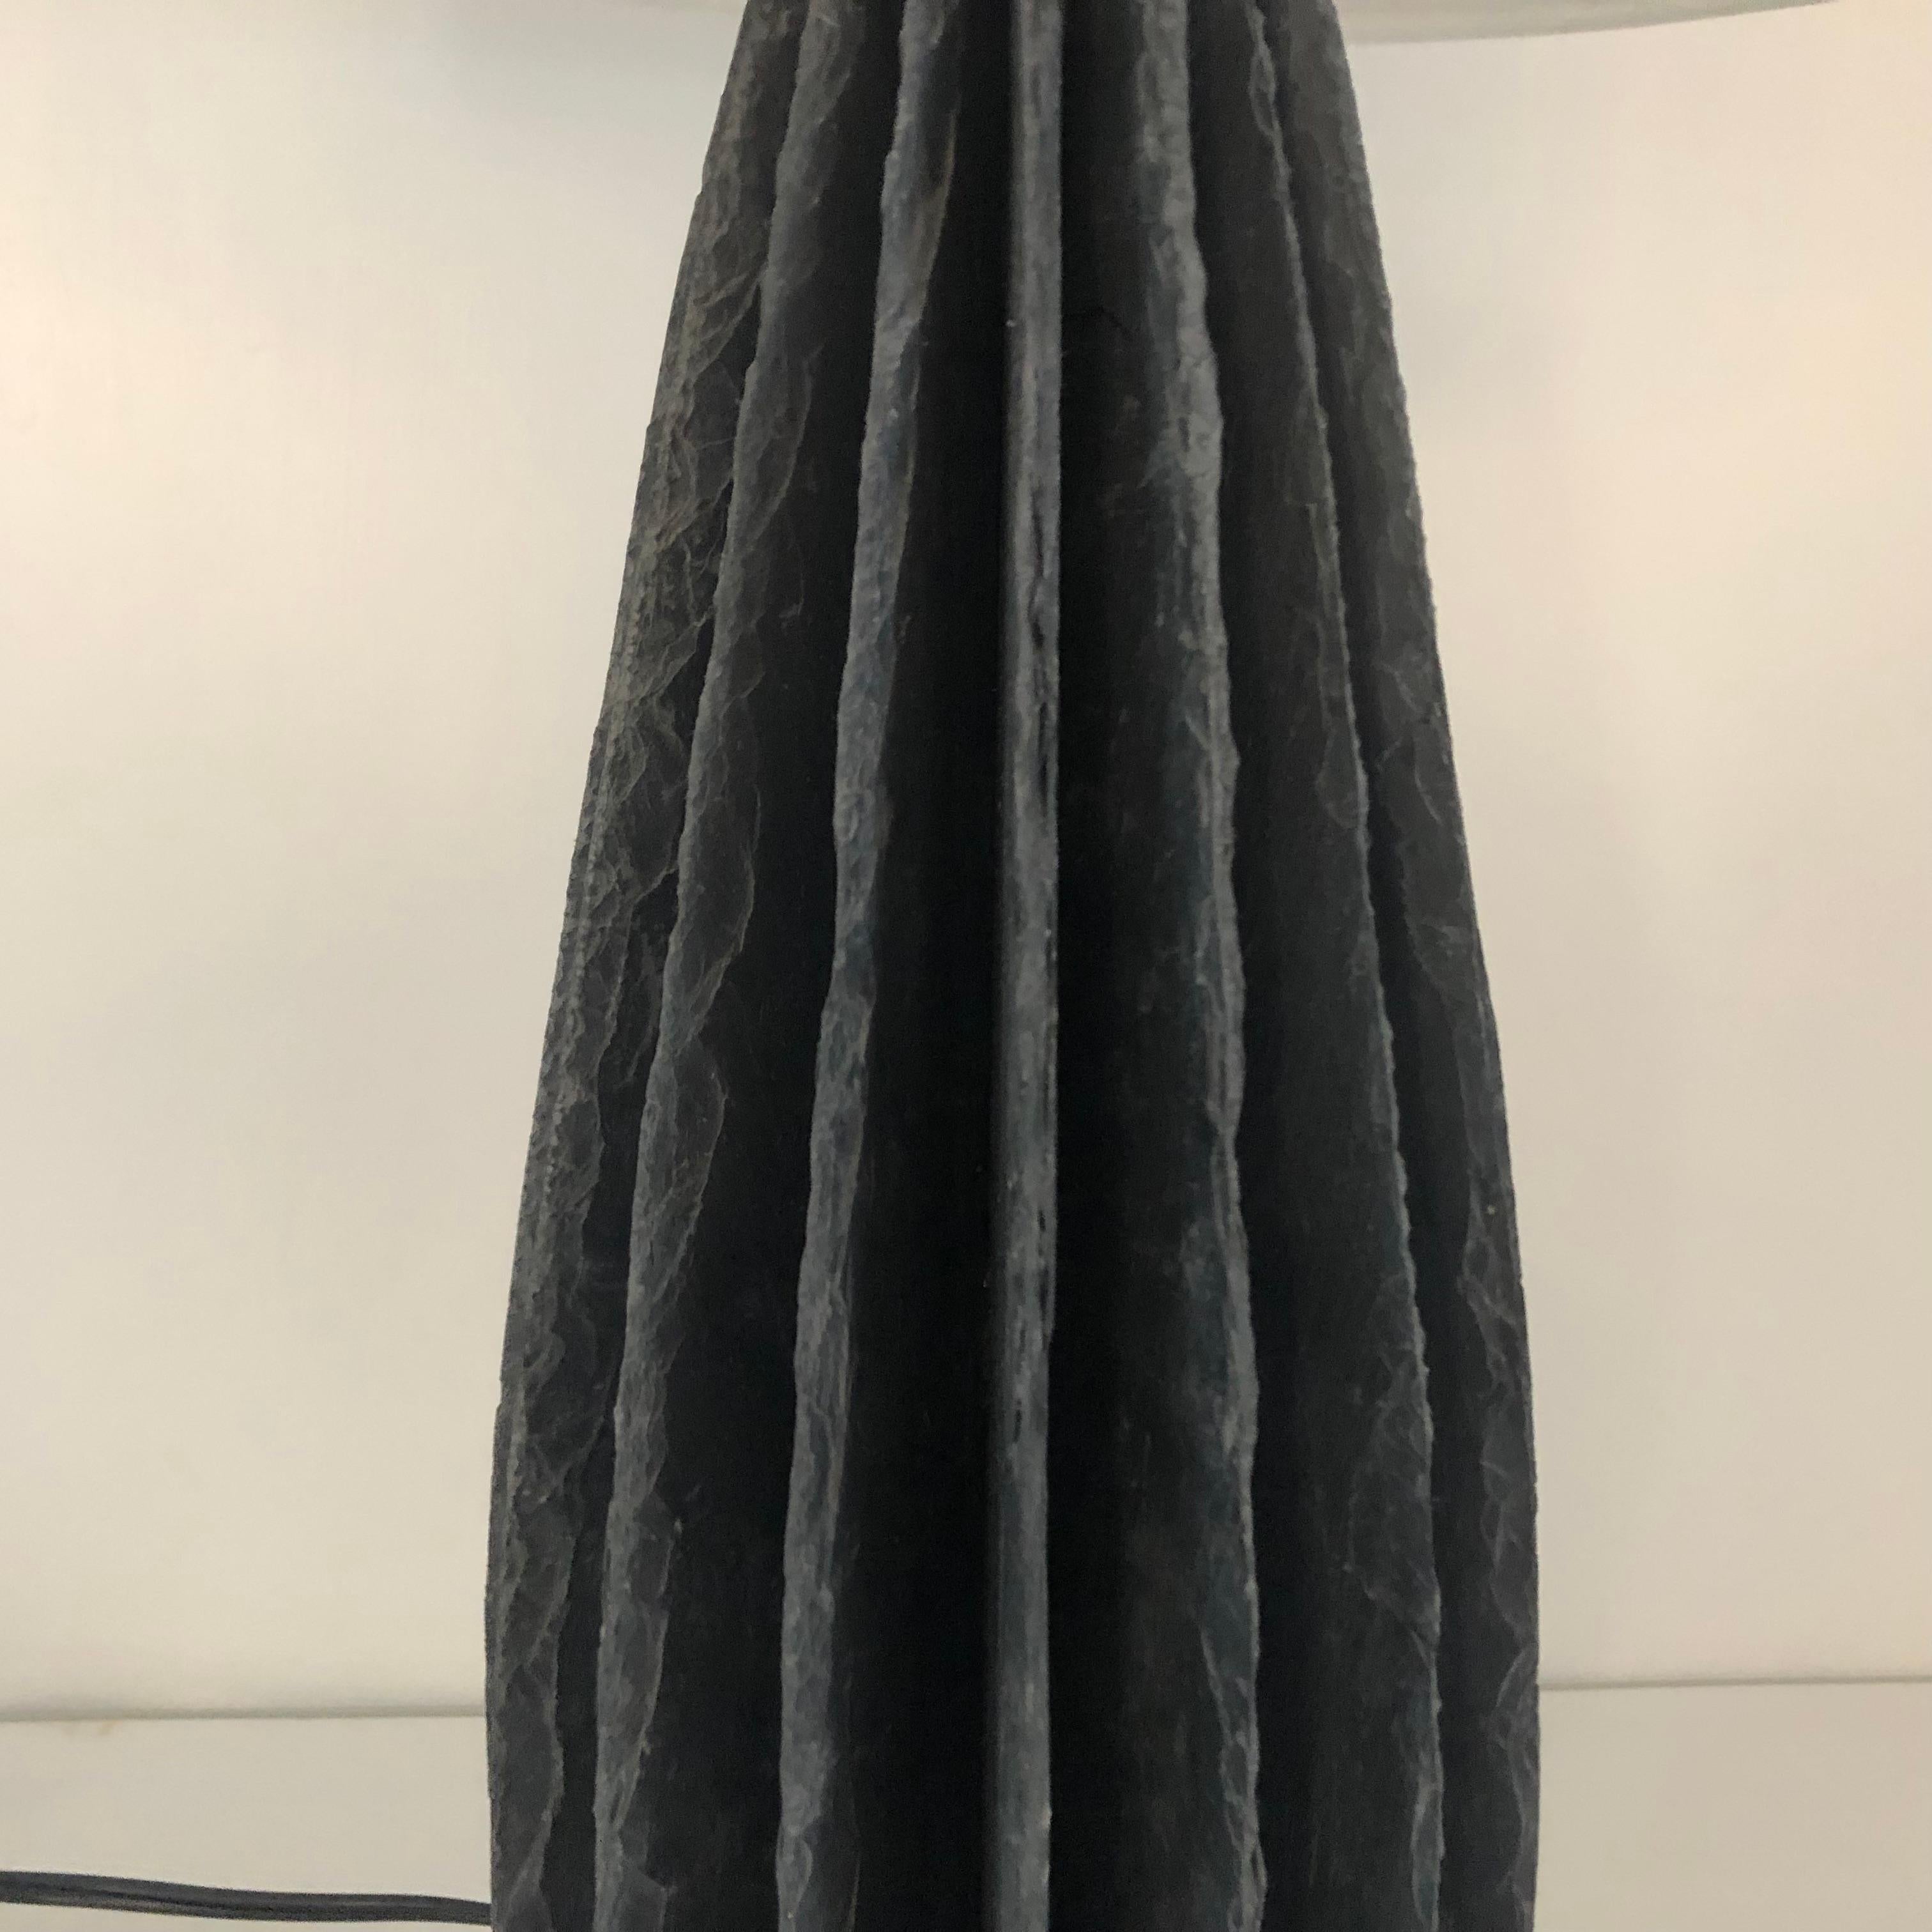 The lamp base is handcrafted using several individually carved sections of blue stone slate, each section is then set on the vertical in a fan like configuration creating the sculptural lamp base. This 